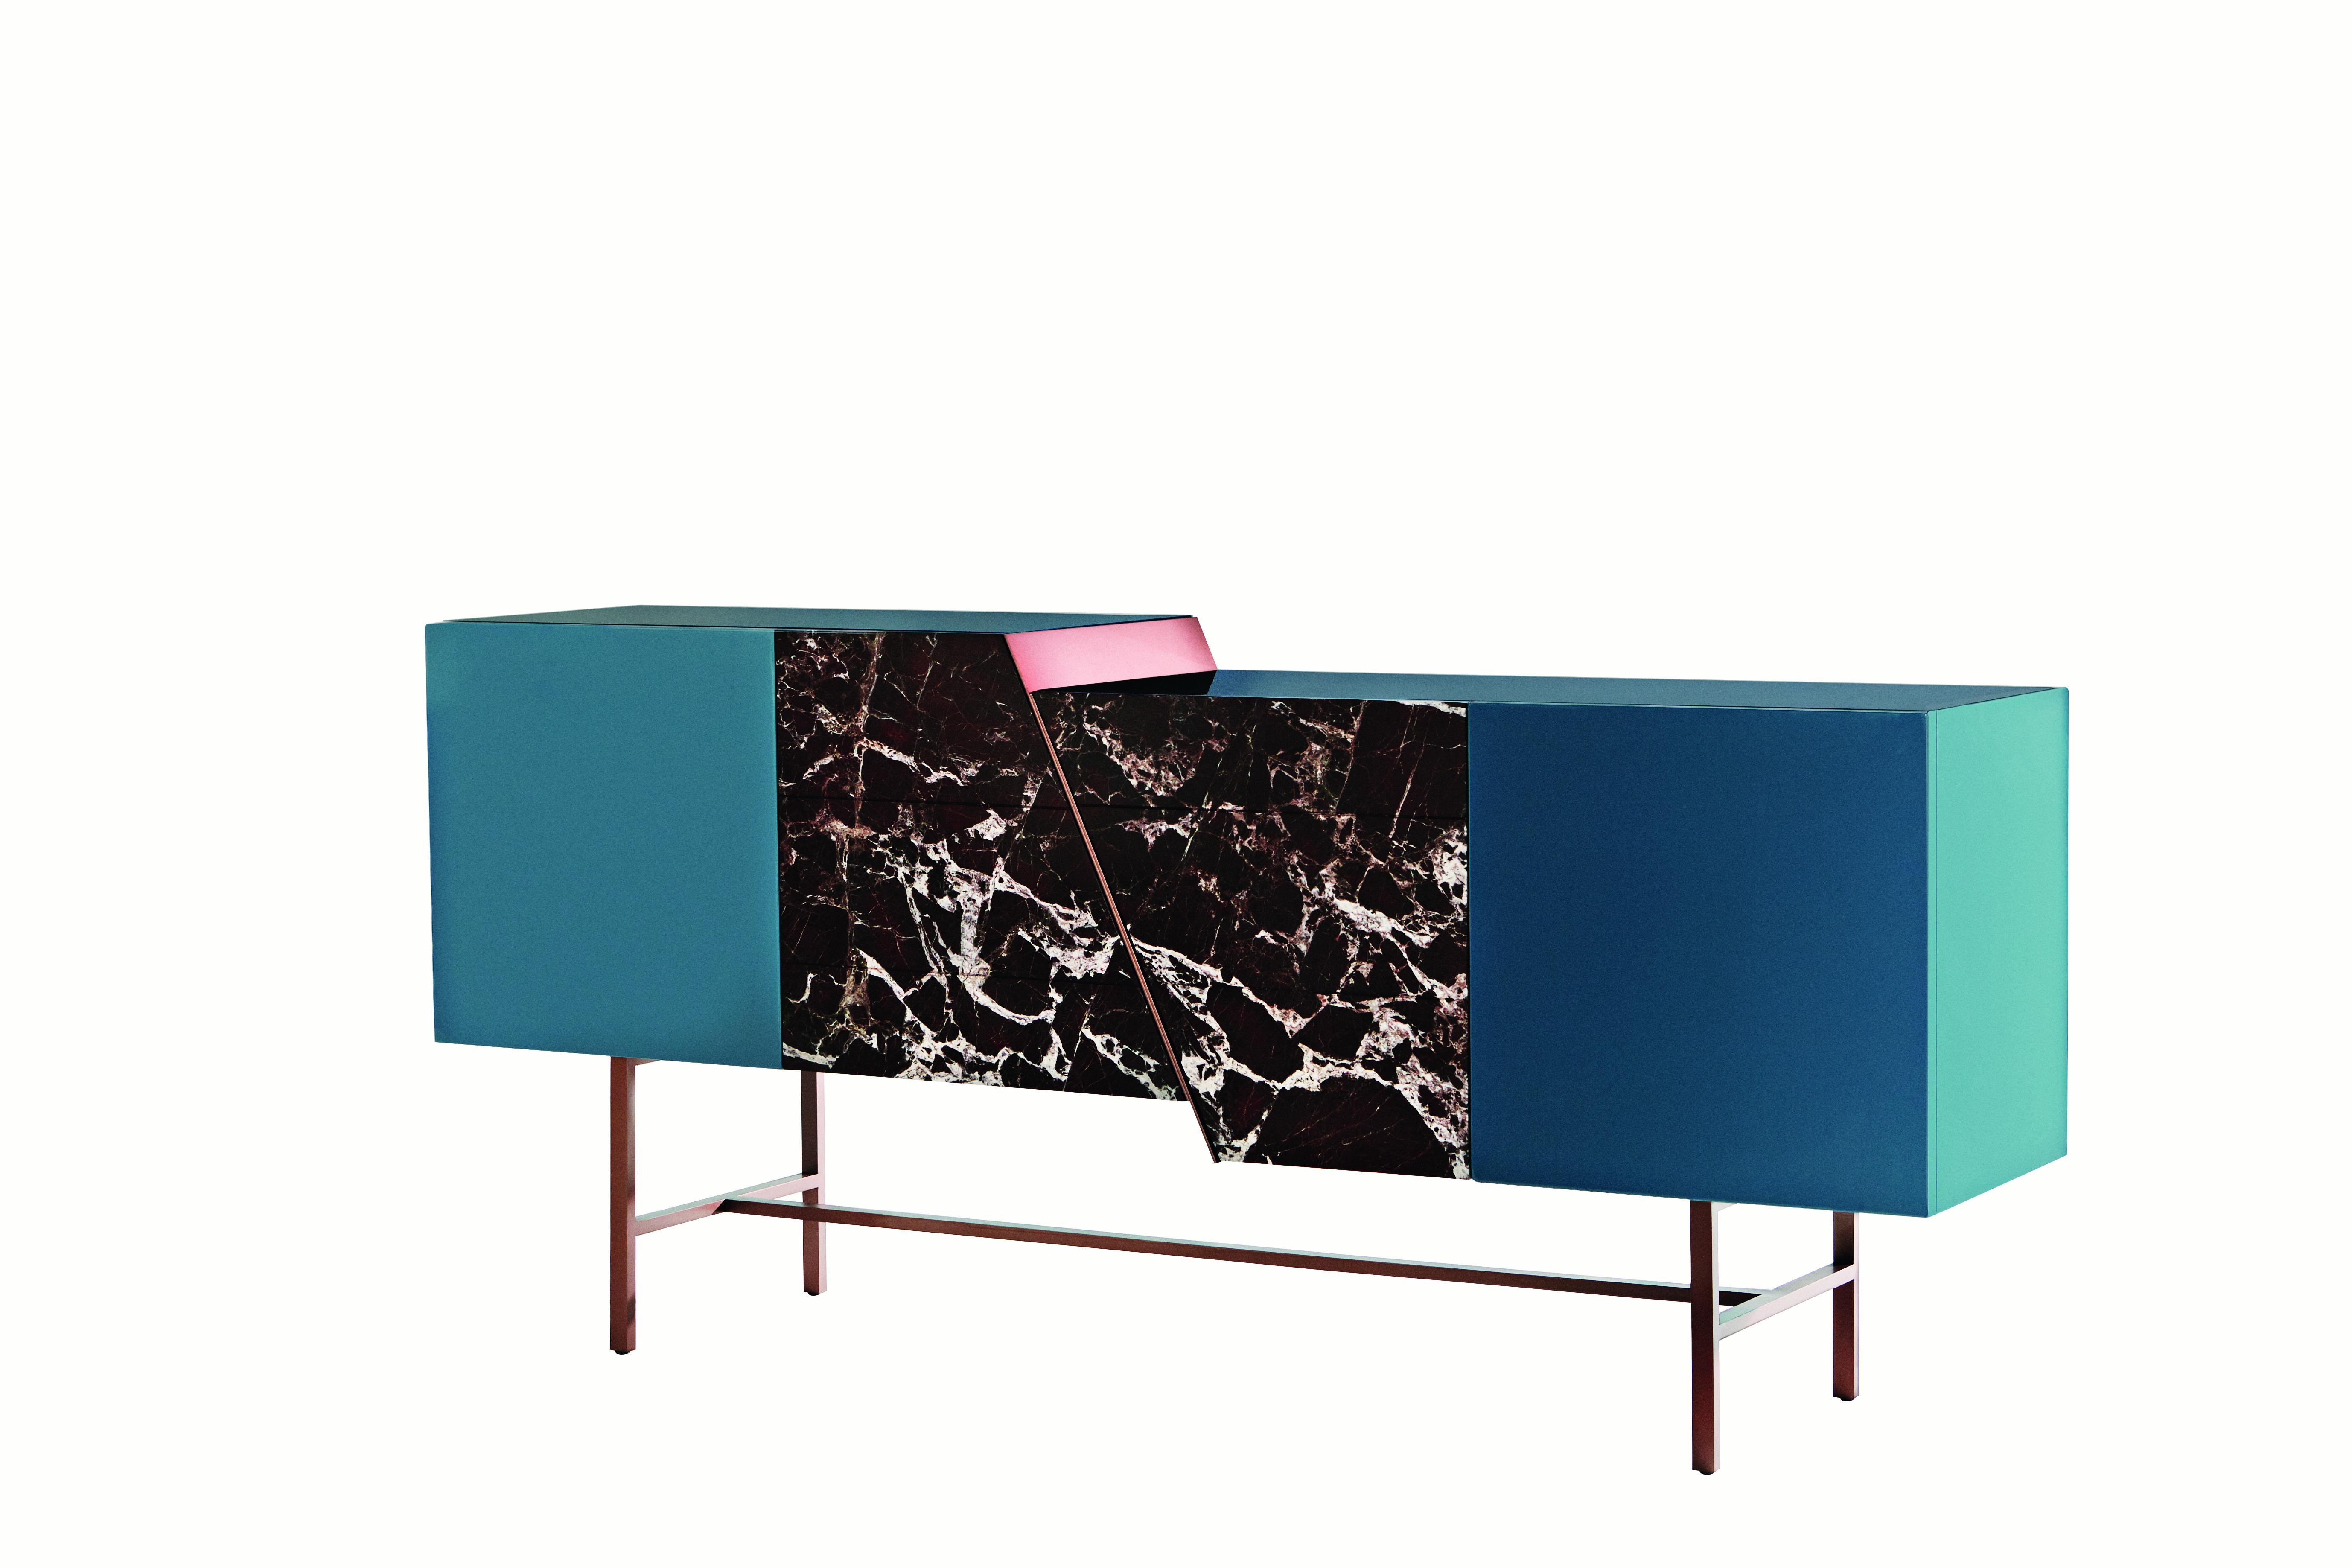 Trapeze sideboard by Hagit Pincovici
Dimensions: 225 L x 50 W x 120 H
Materials: Lacquered wood, Rosso Lepanto Marble, Copper finish

Hagit Pincovici founded her eponymo us bespoke luxury furniture and lighting atelier in 2014. Known in her